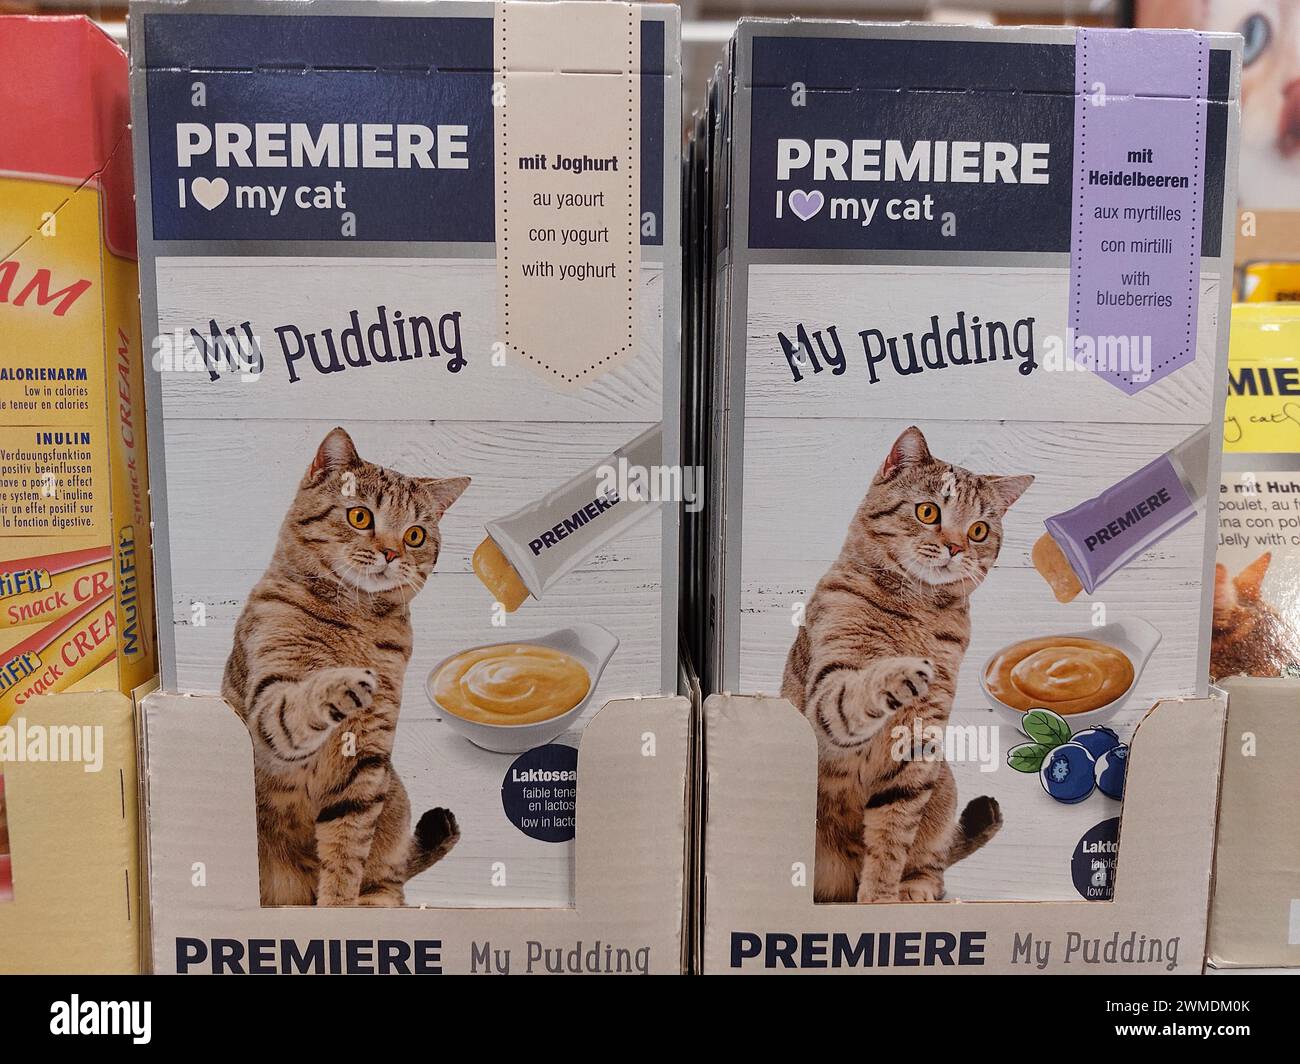 Premiere my pudding cat food packs in a pet shop Stock Photo